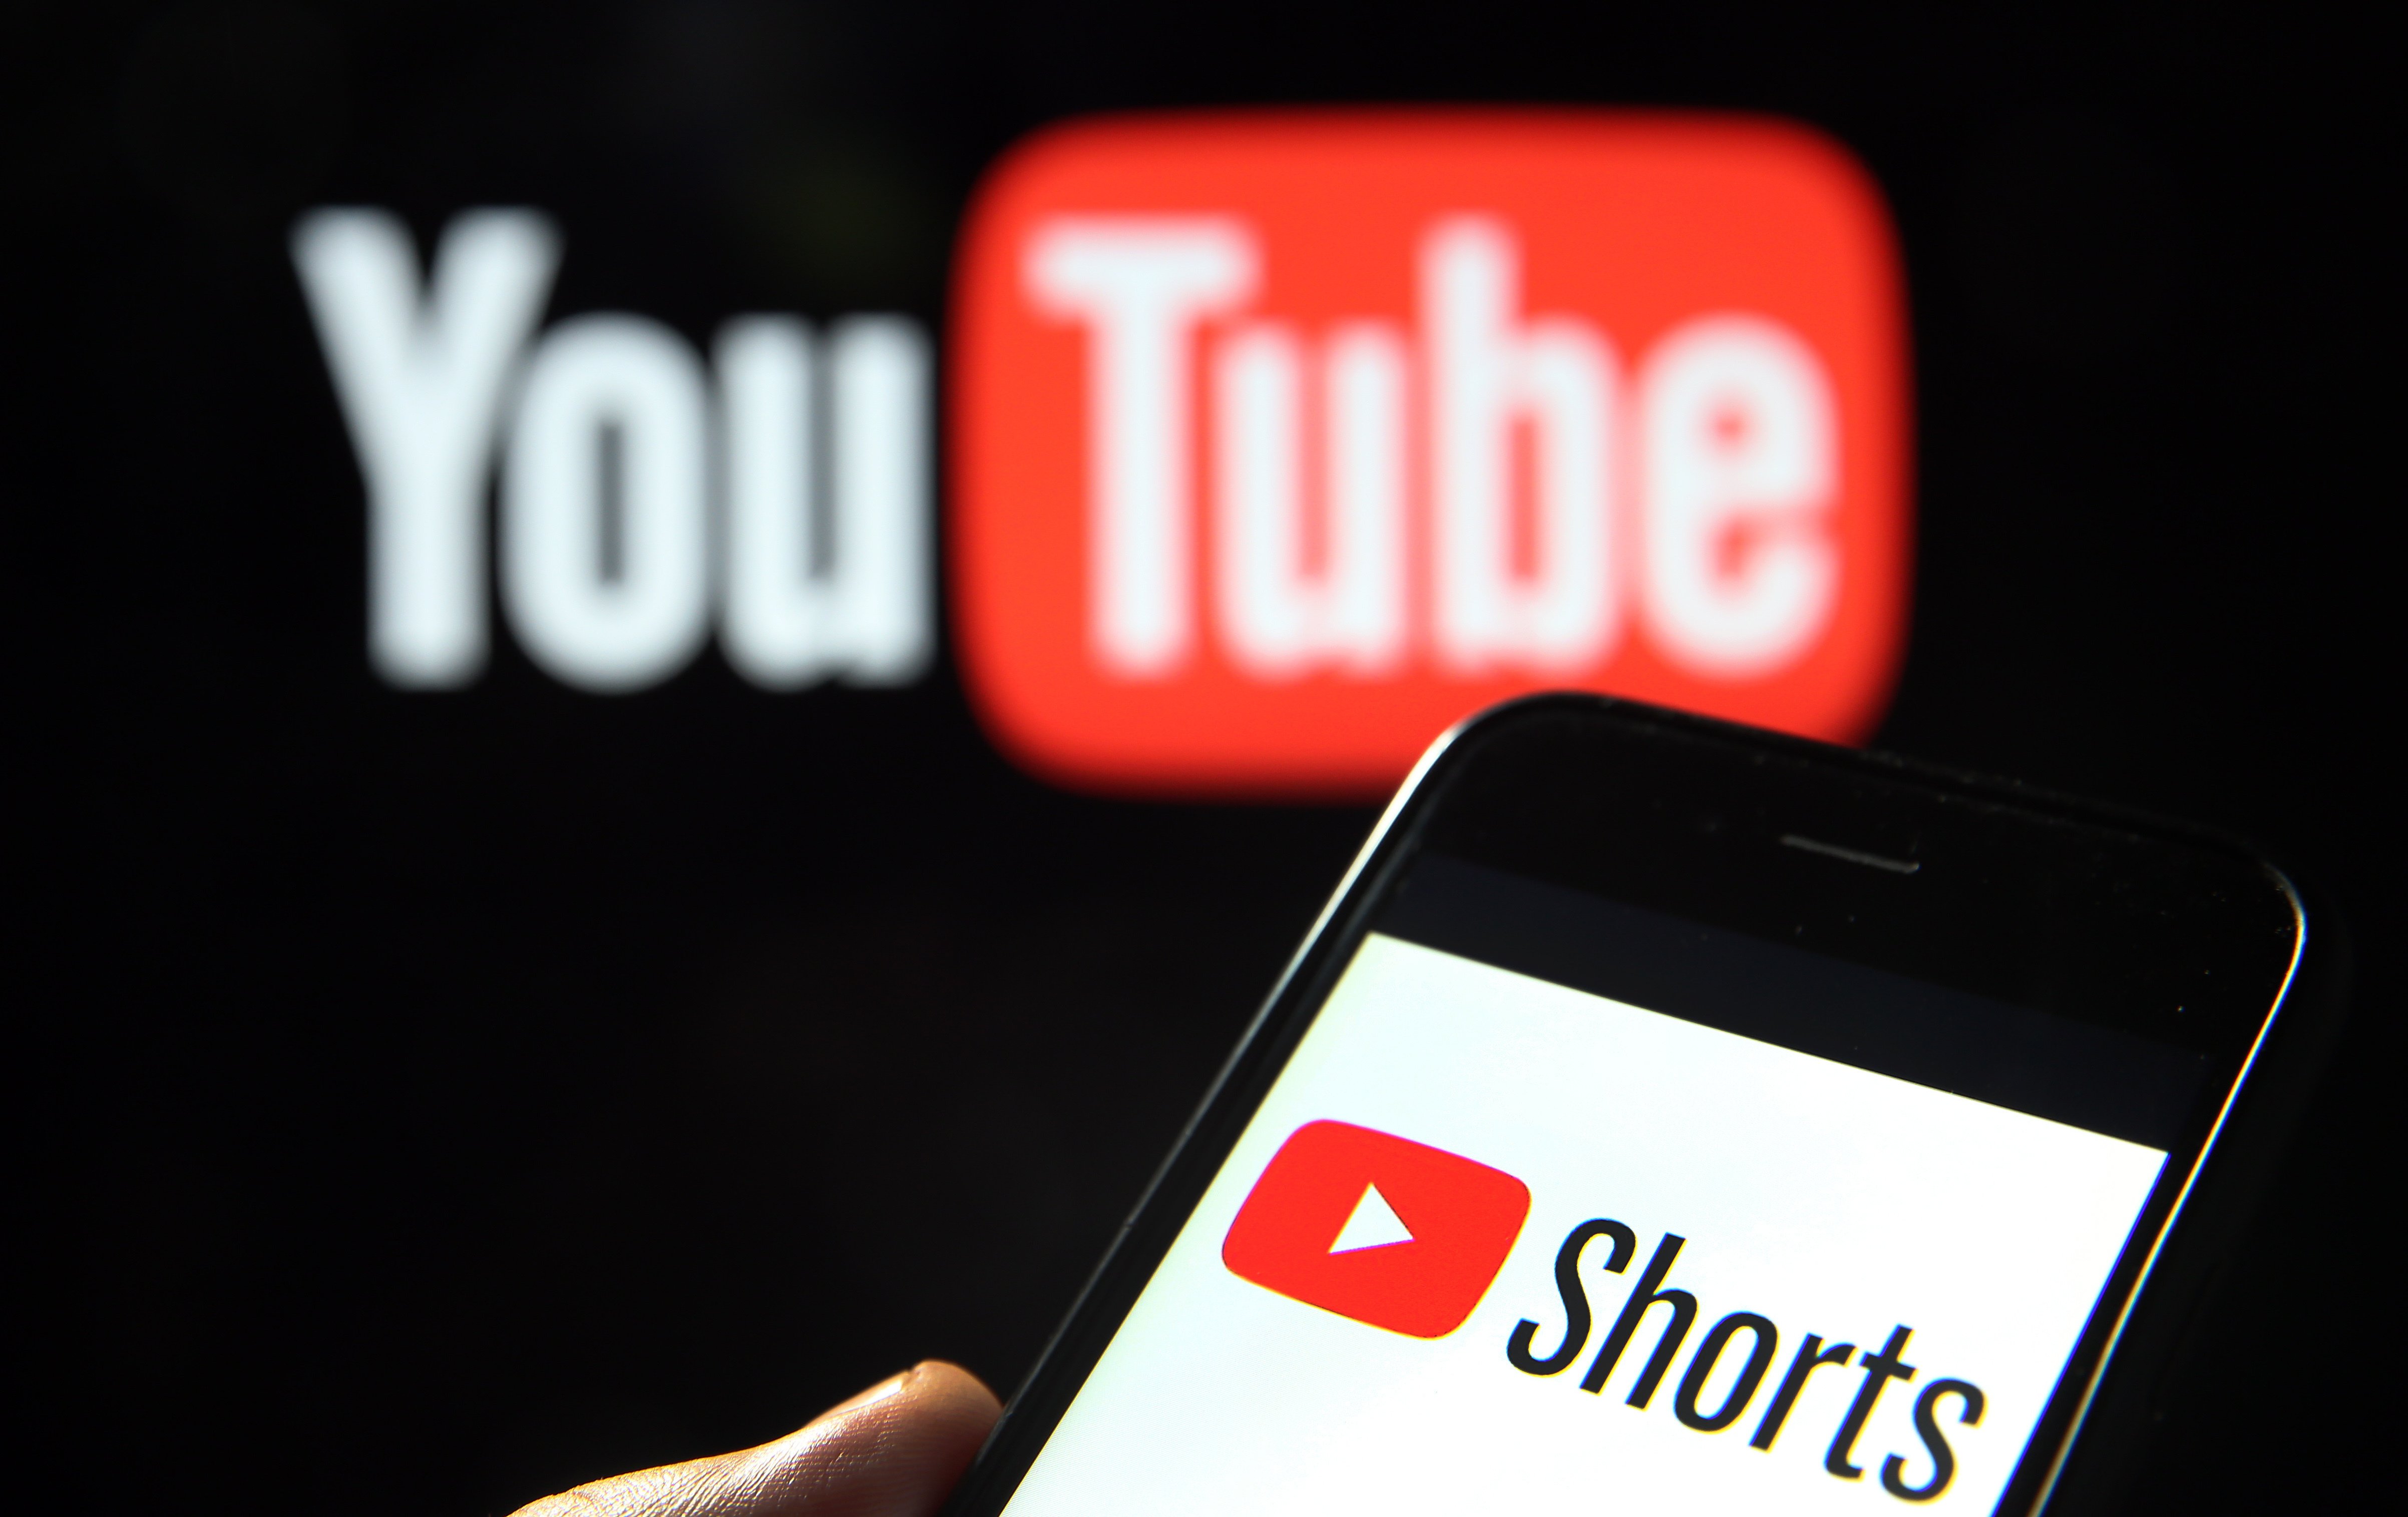 In the foreground, a hand holds a phone with the YouTube Shorts logo visible in red, white and black. In the background and out of focus is the YouTube logo.